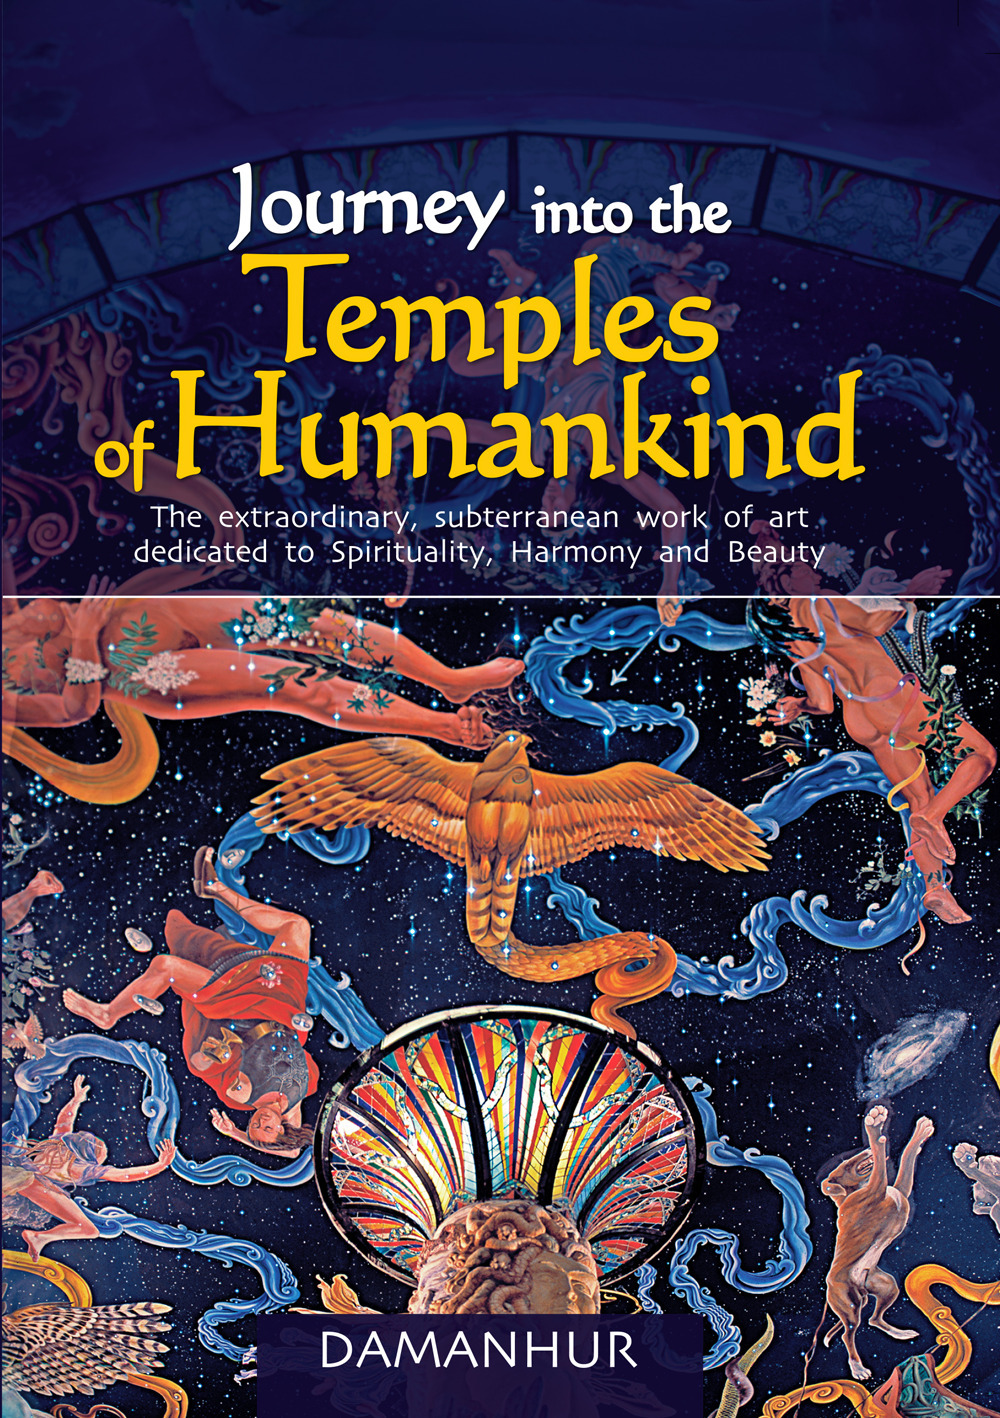 Journey into the temples of humankind. The extraordinary, subterranean work of art dedicated to spirituality, harmony and beauty